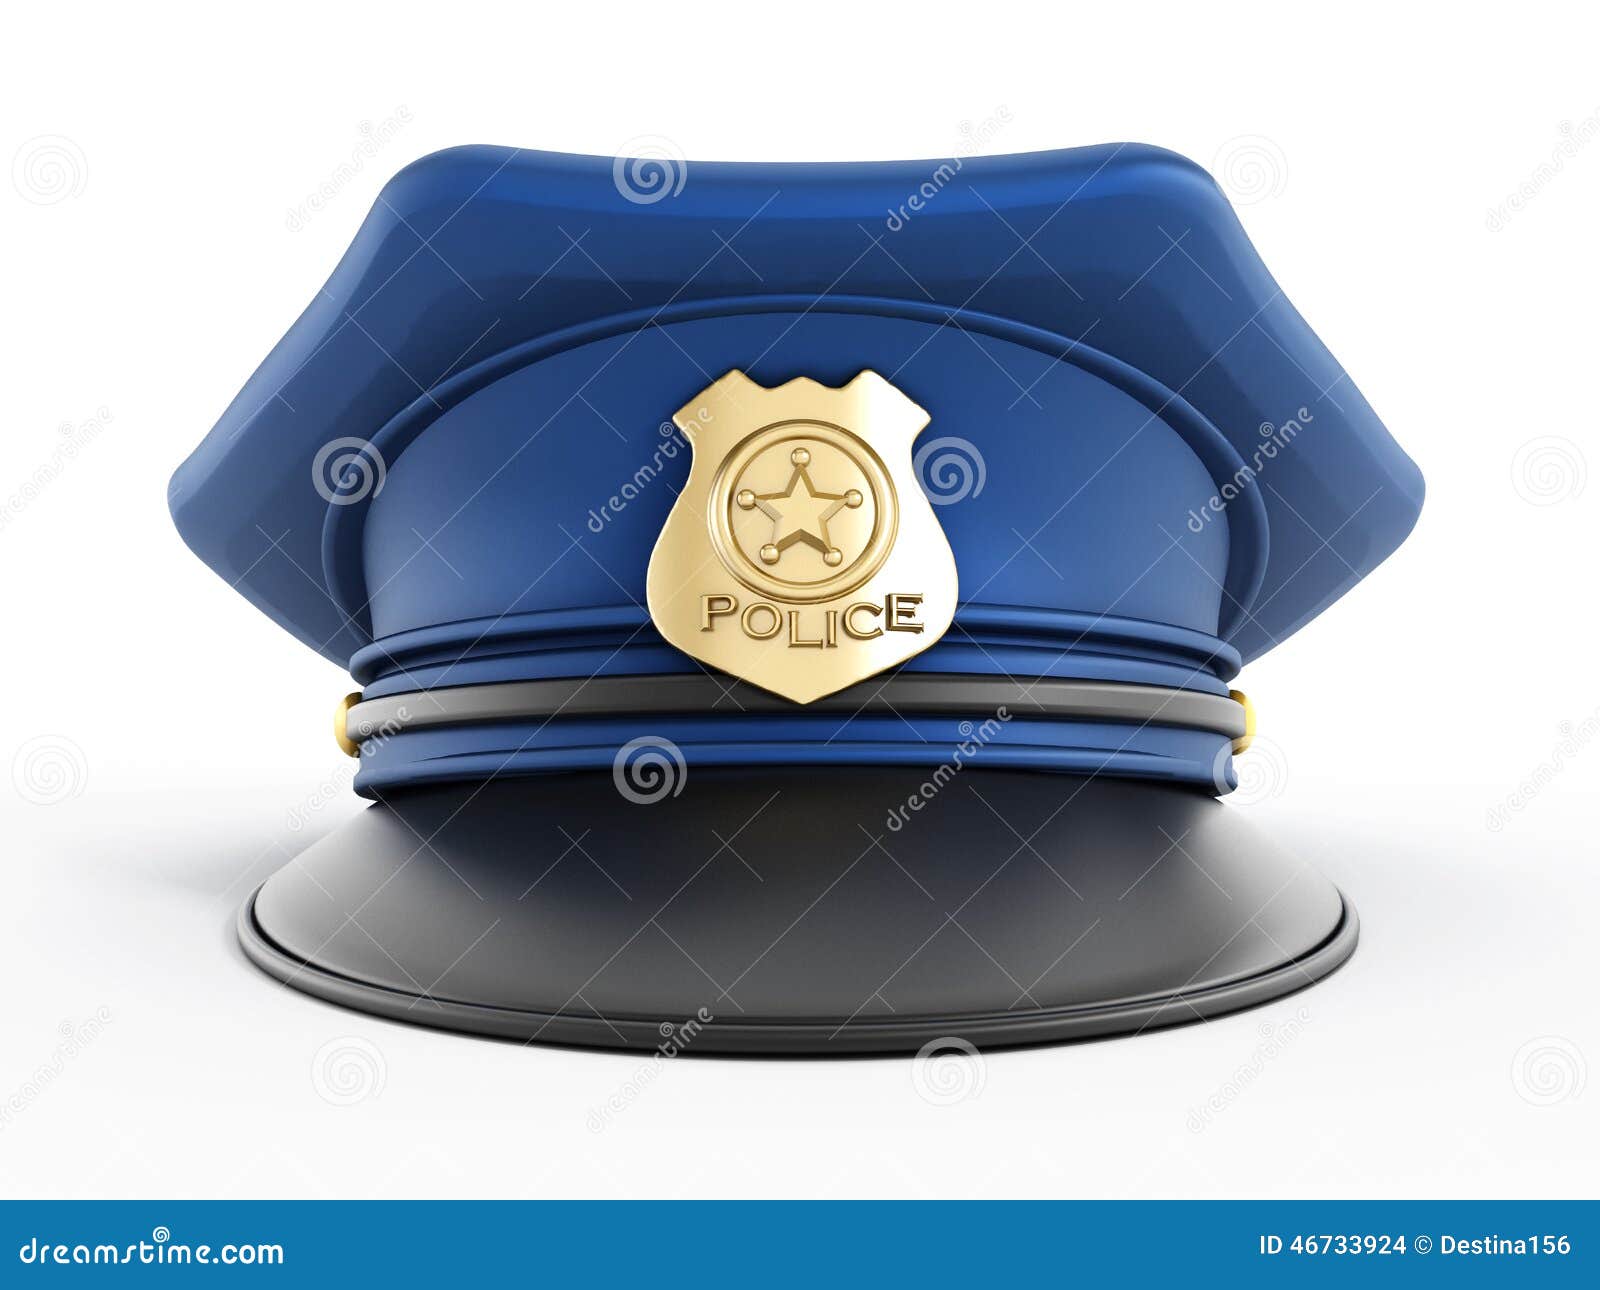 police officer hat clipart - photo #31